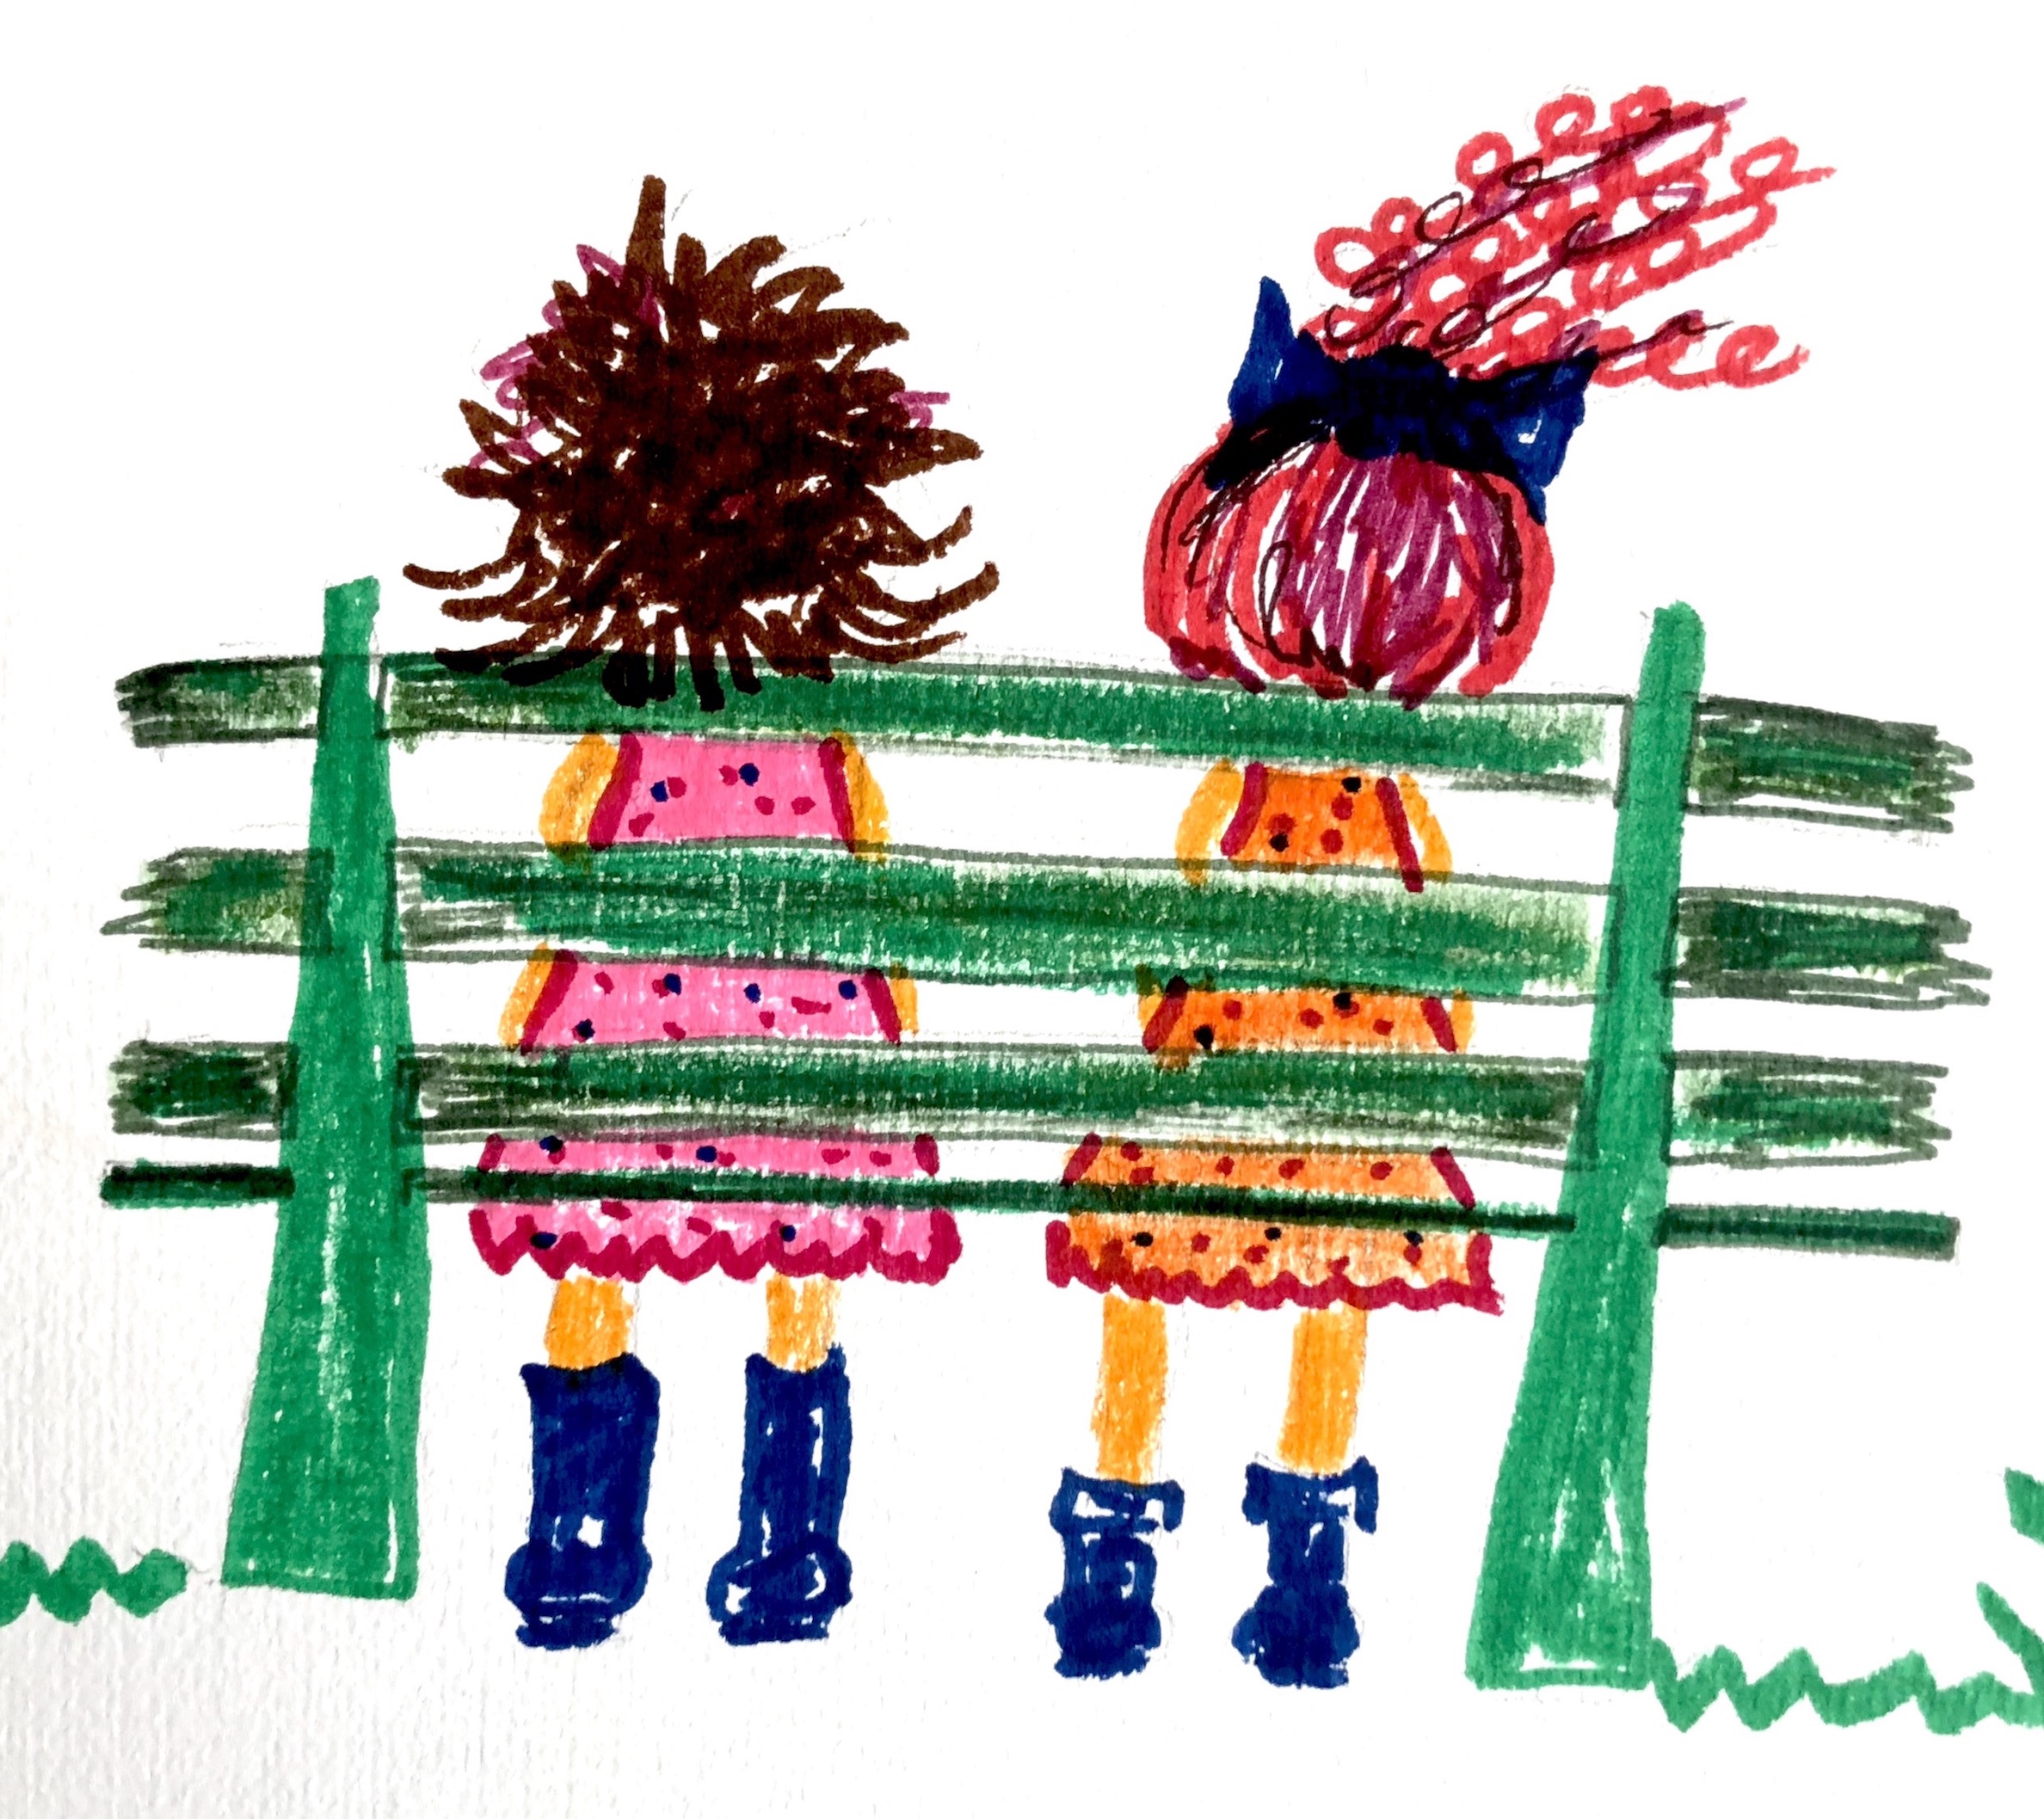 2 Girls on a Bench the Podcast Album Art